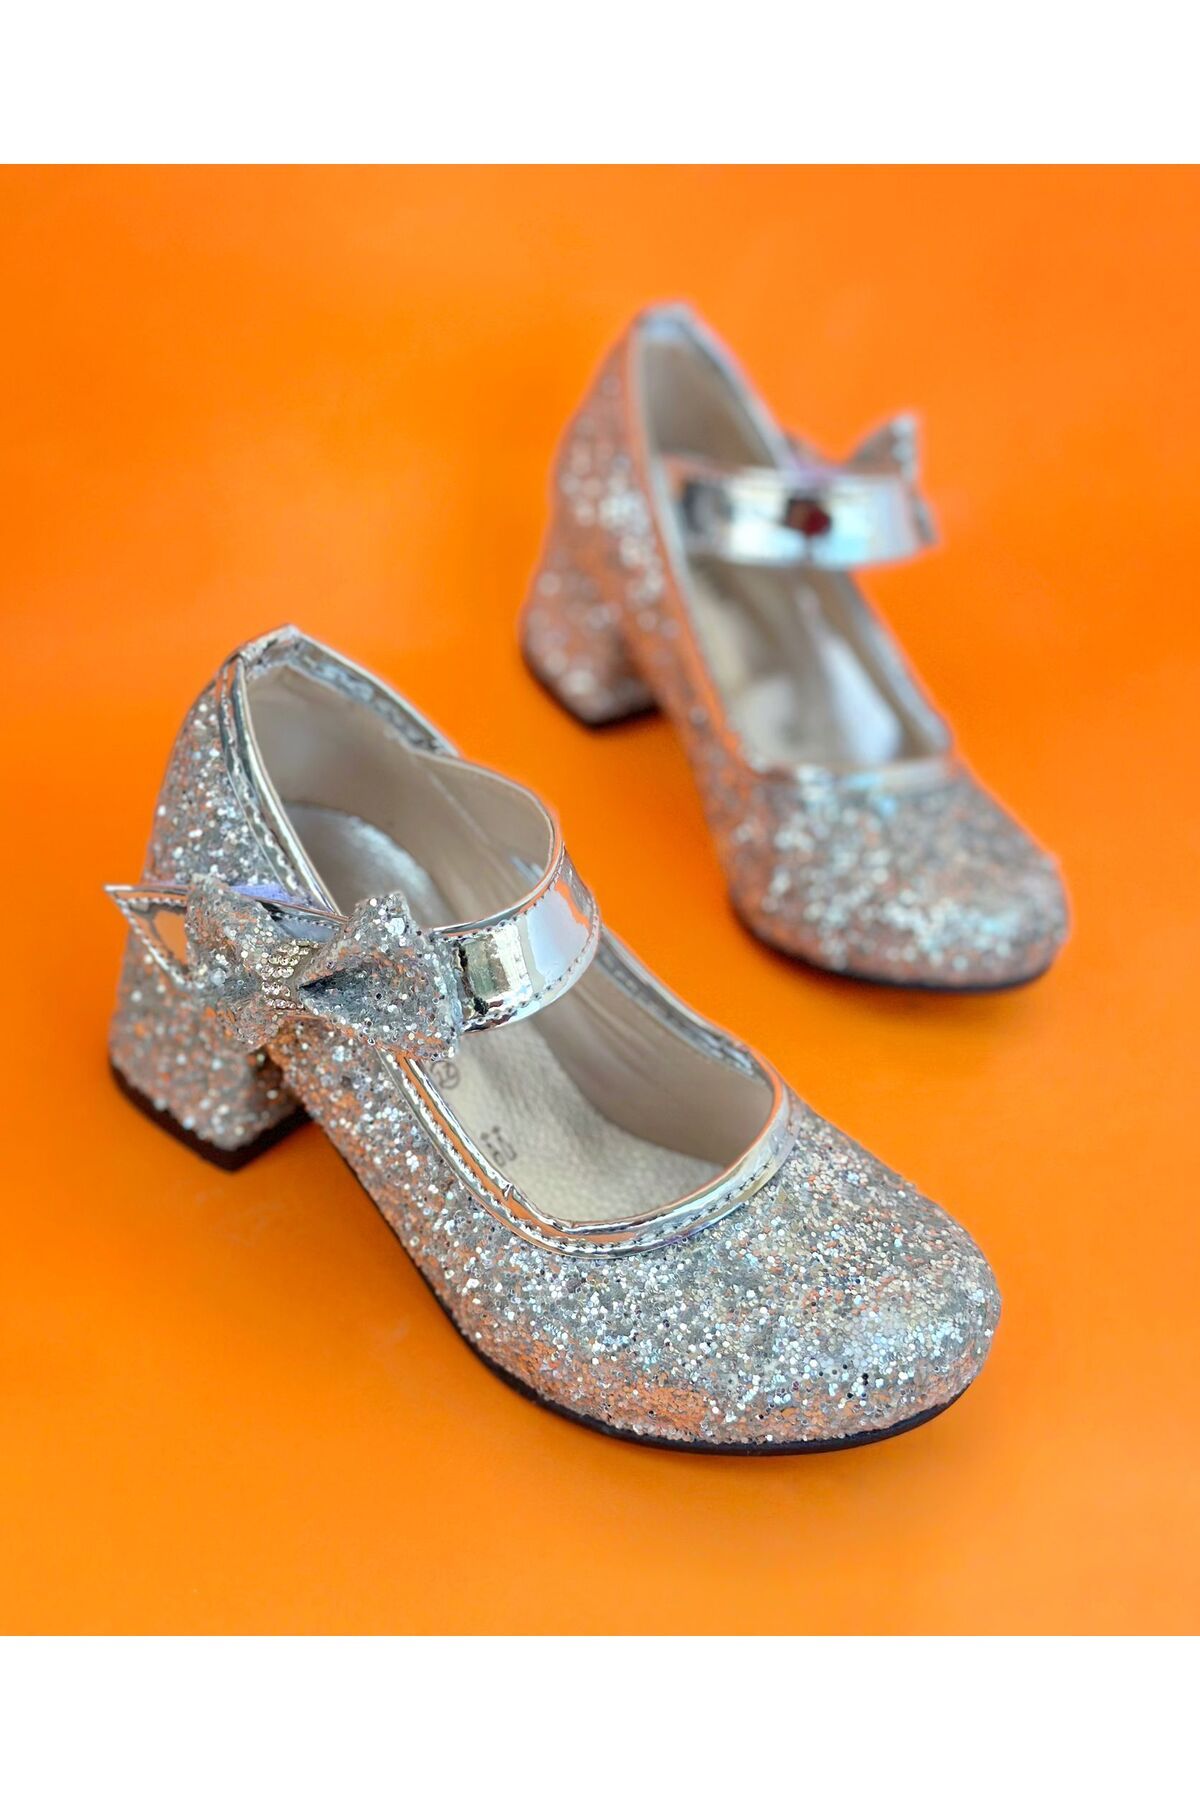 Amazon.com: Sparkly Shoes For Girls